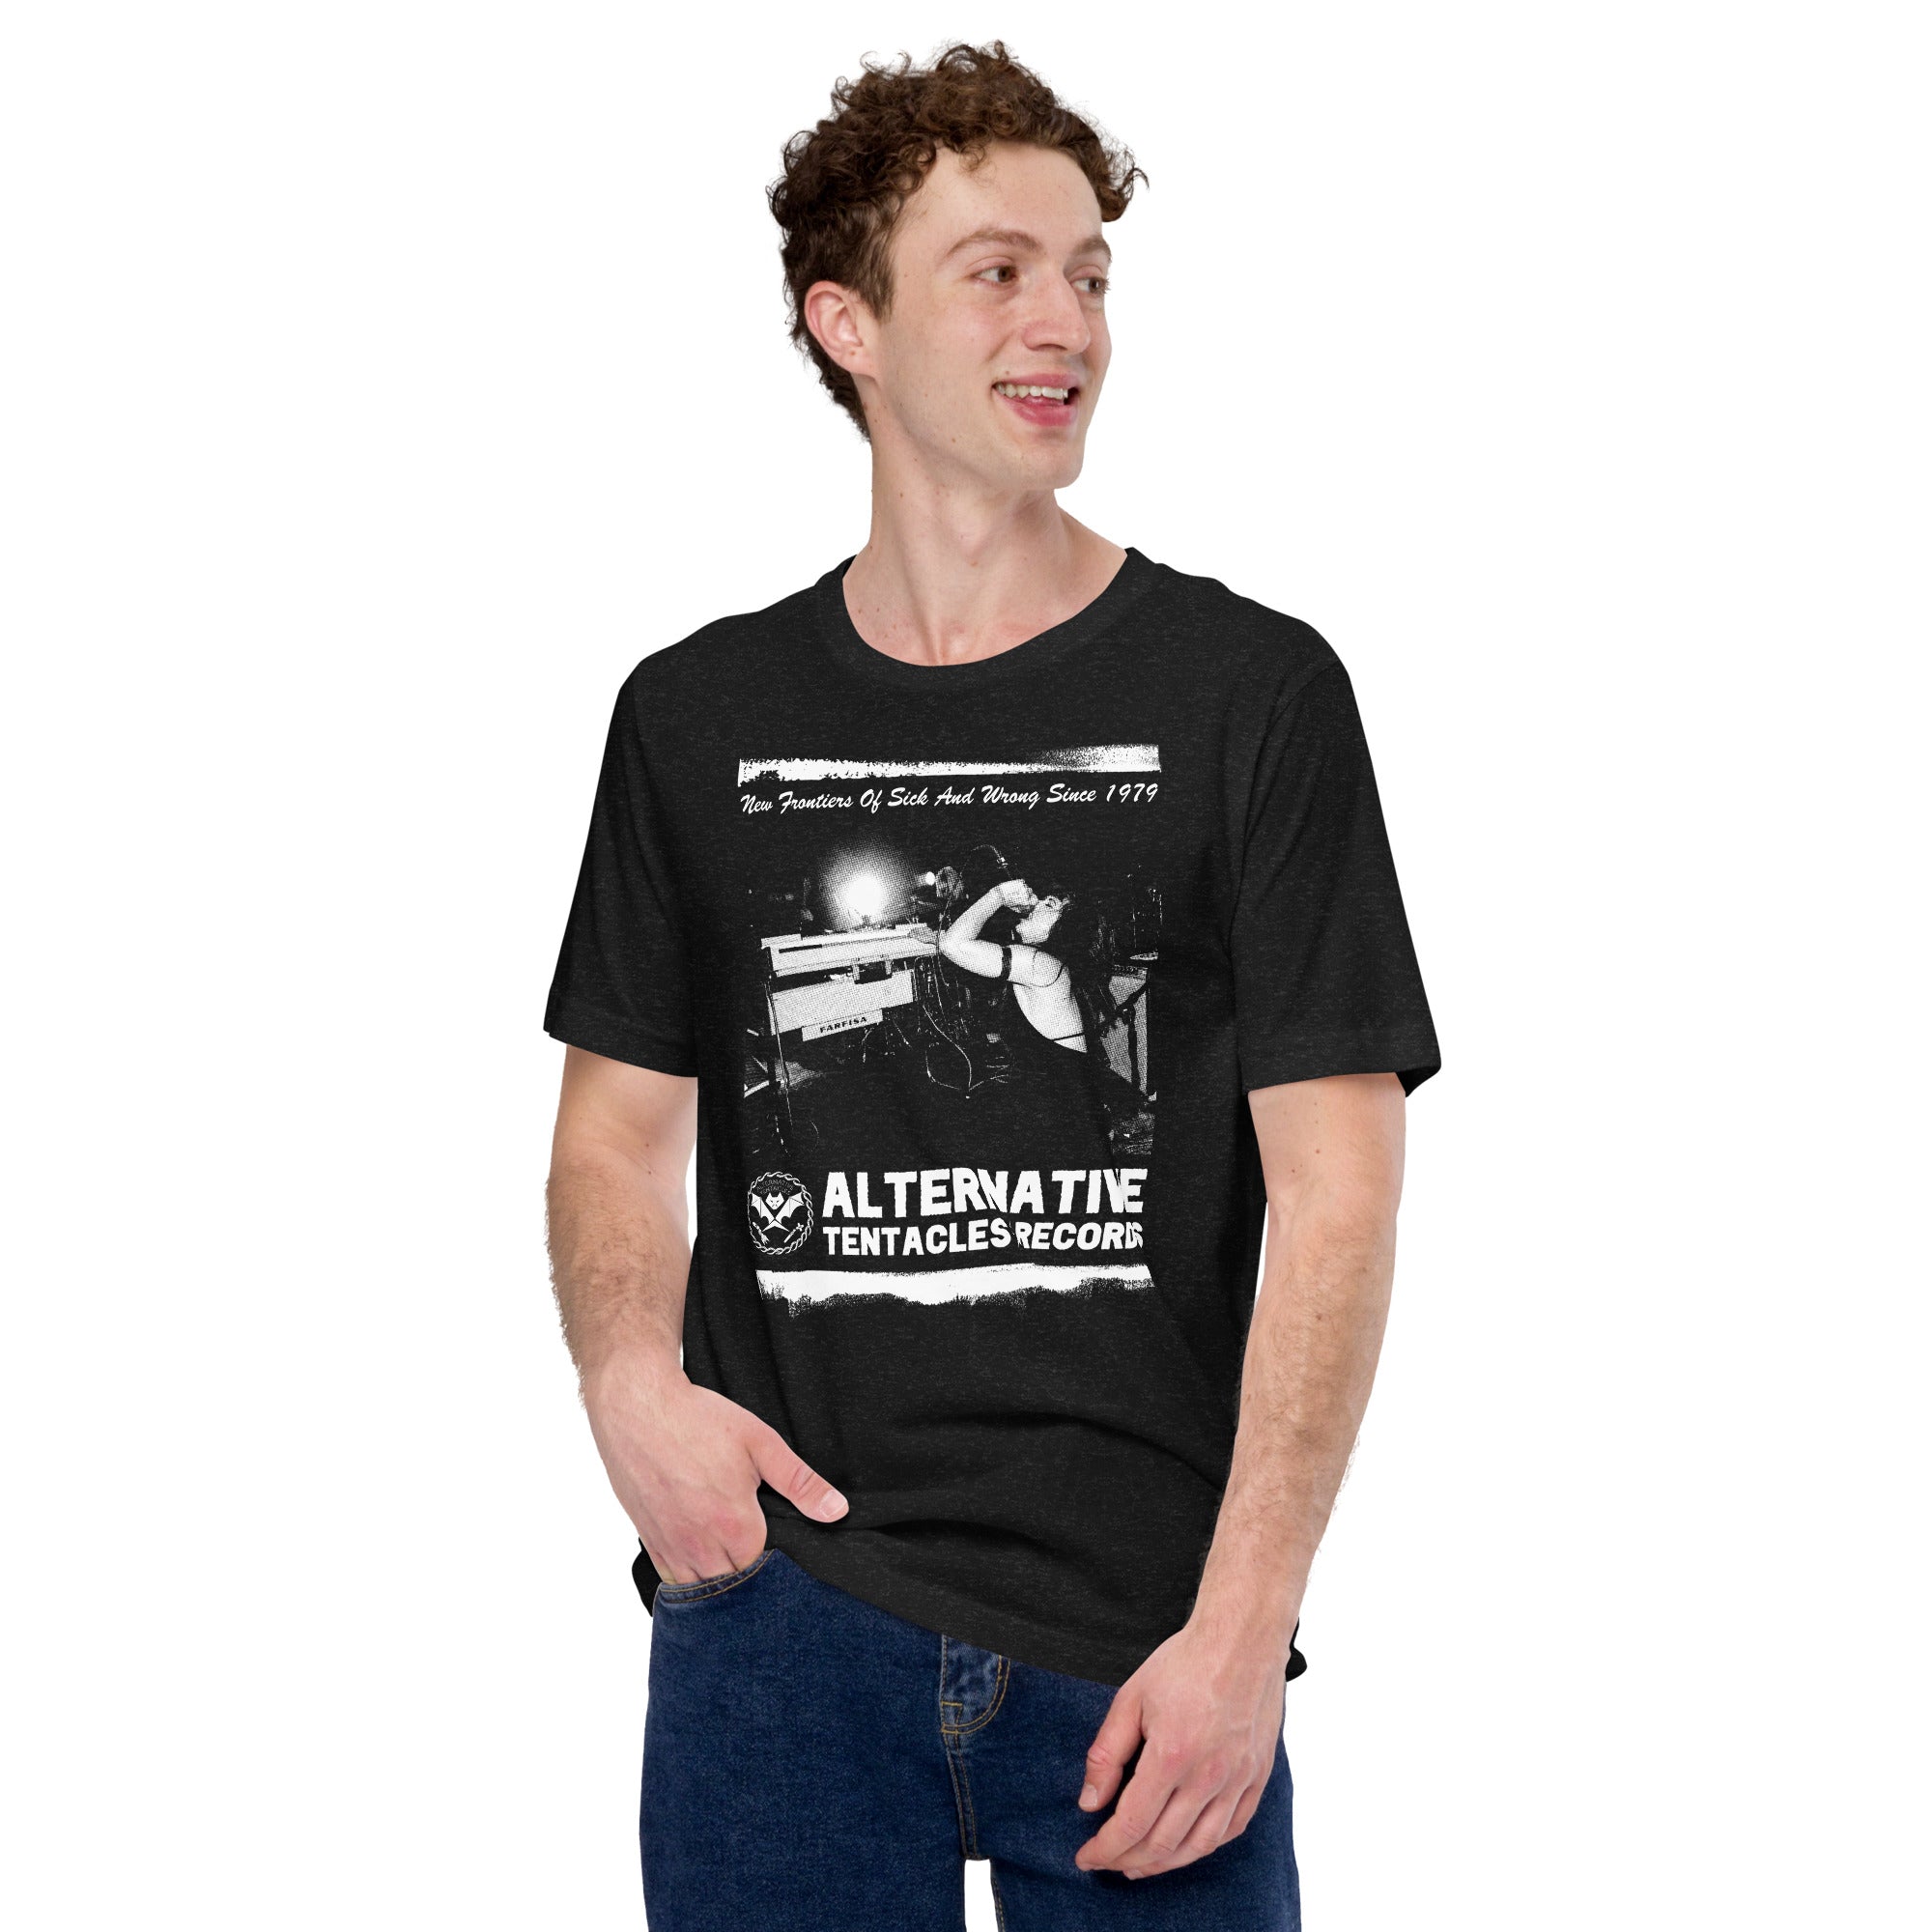 "New Frontiers Of Sick And Wrong Since 1979" feat. THE DARTS Unisex T-Shirt